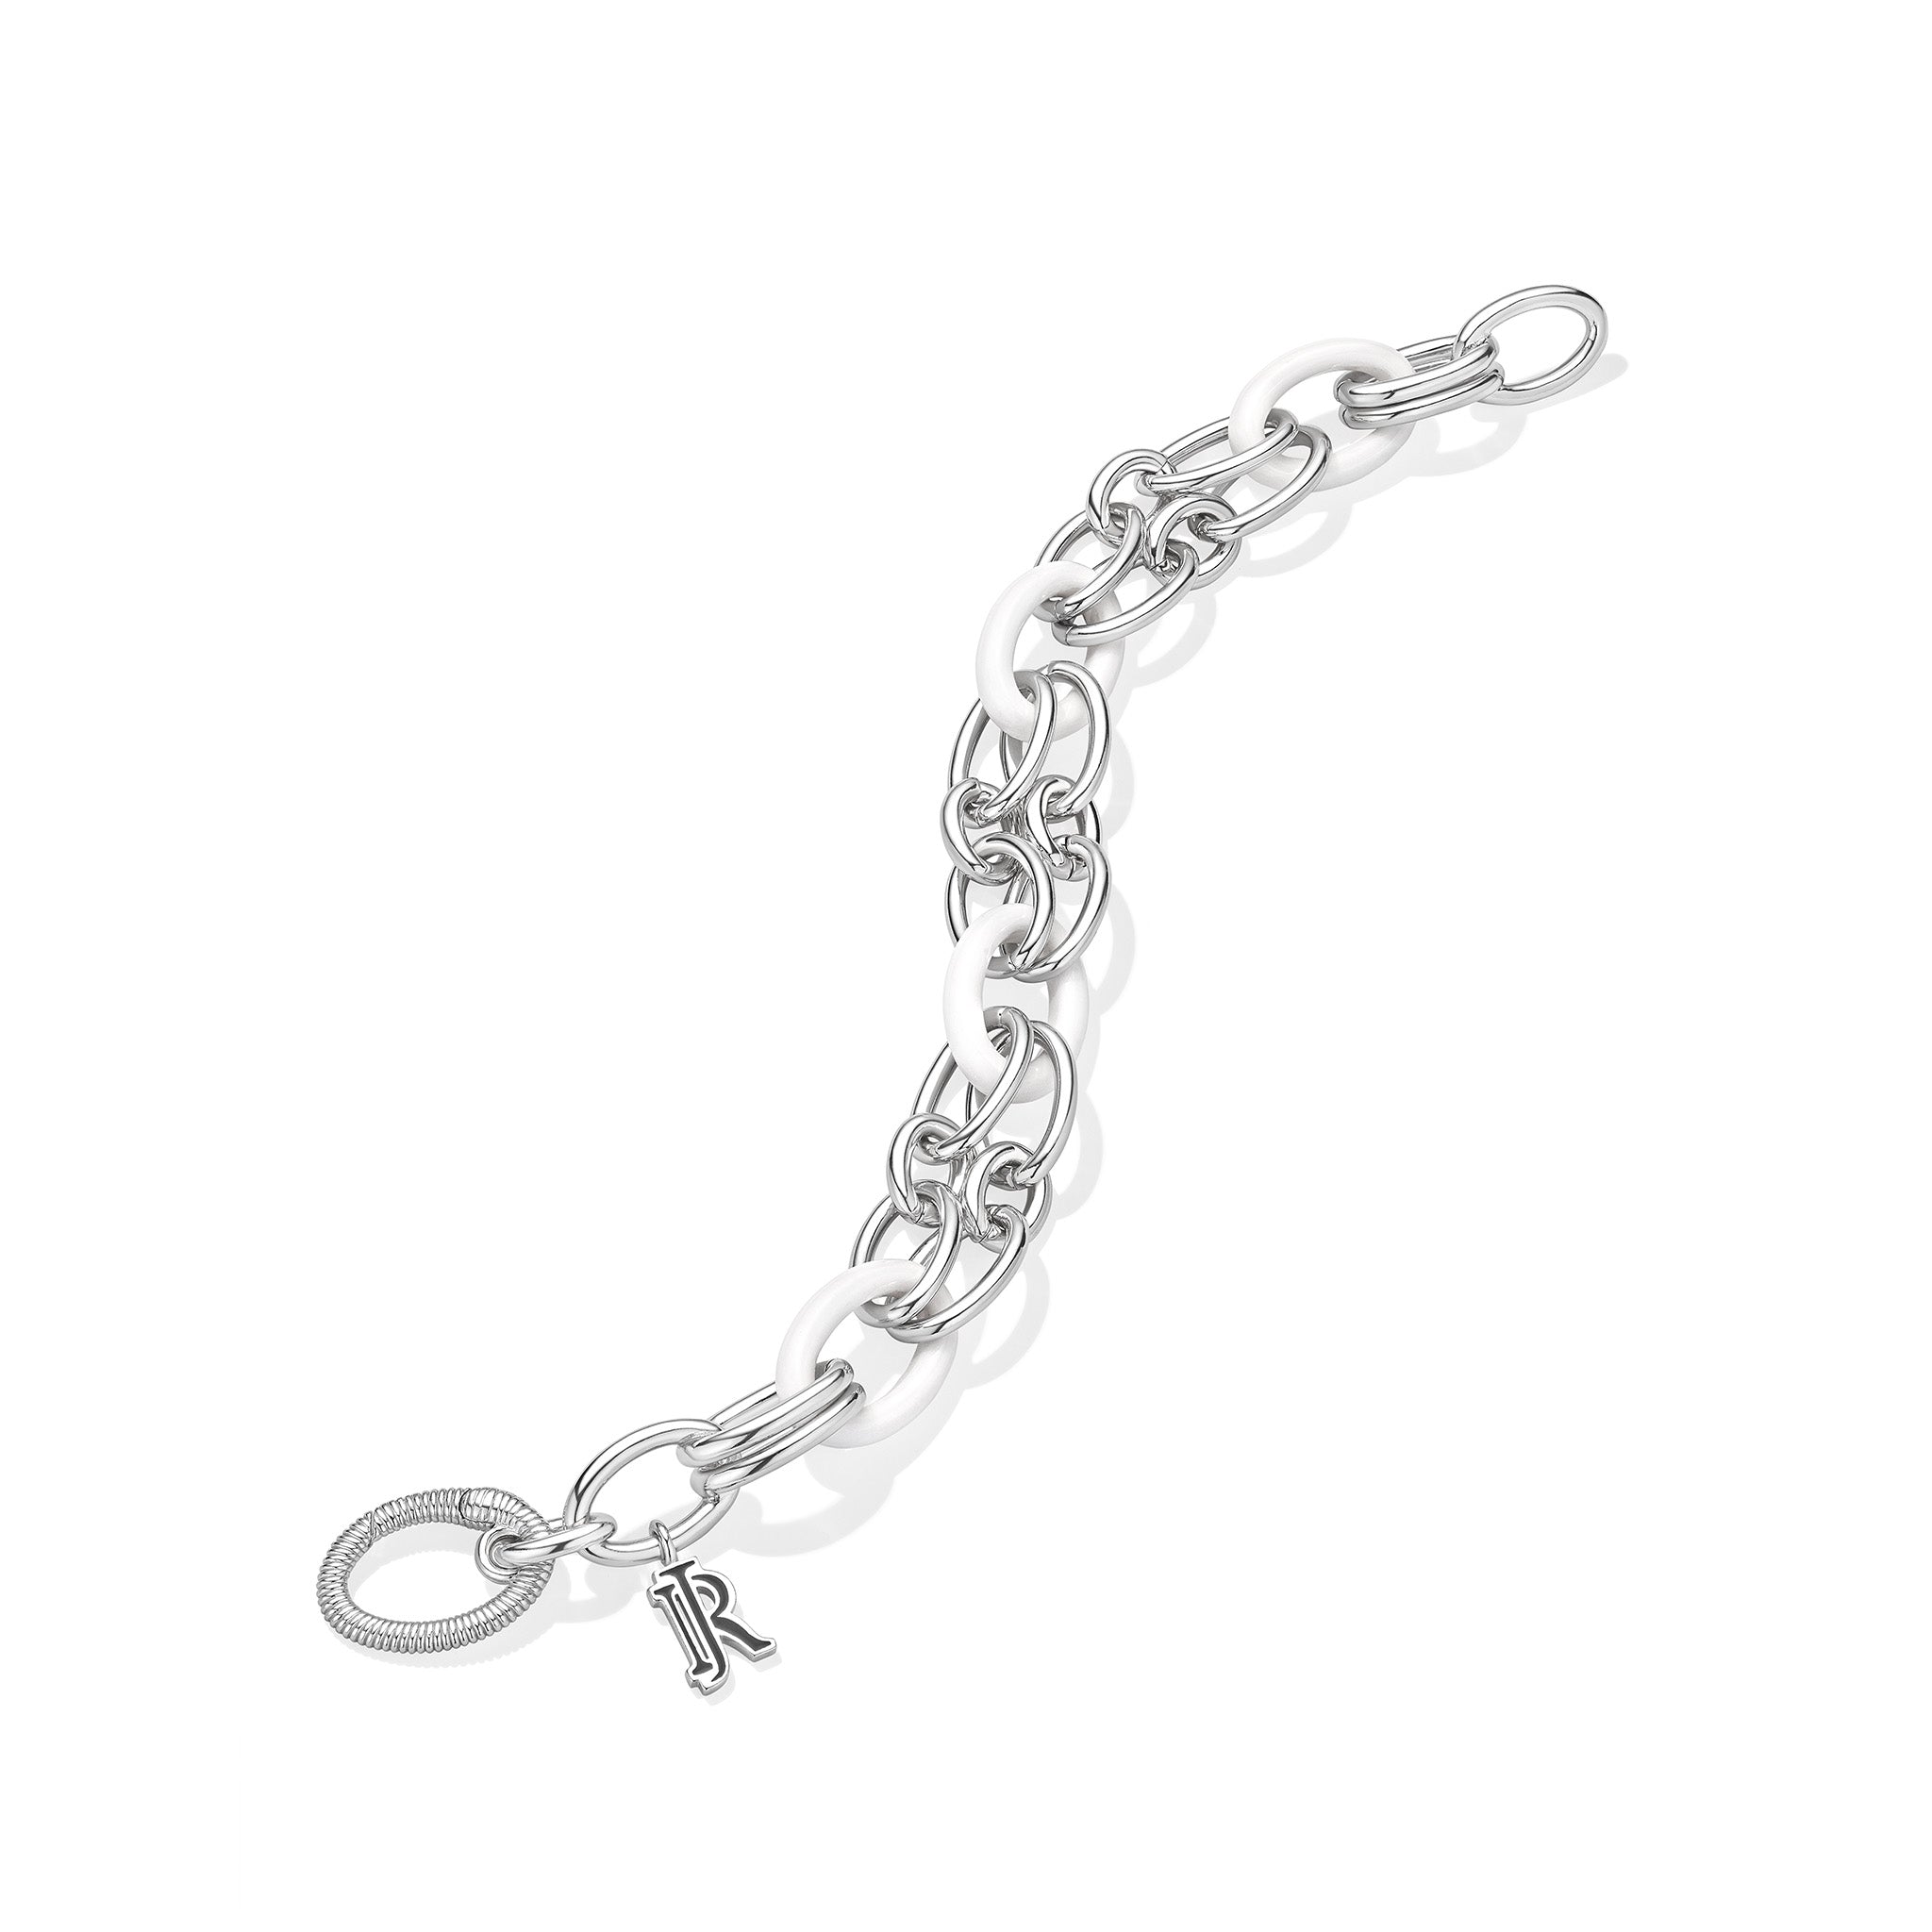 Eternity Signature Double Link Bracelet with White Agate